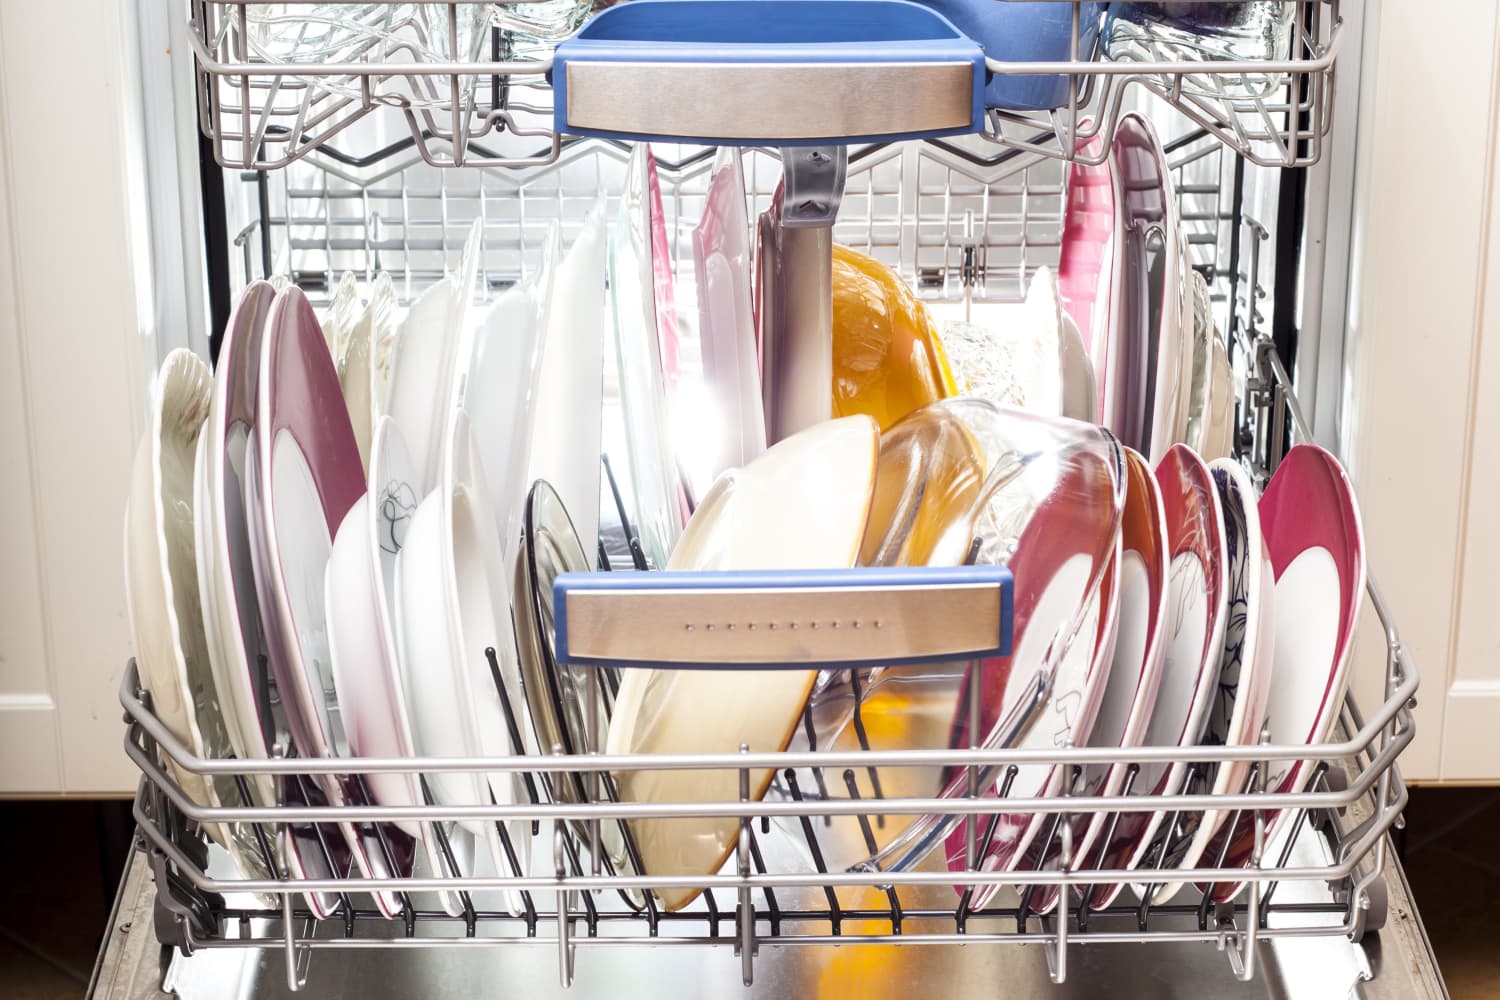 These 11 Things Are Not Dishwasher Safe